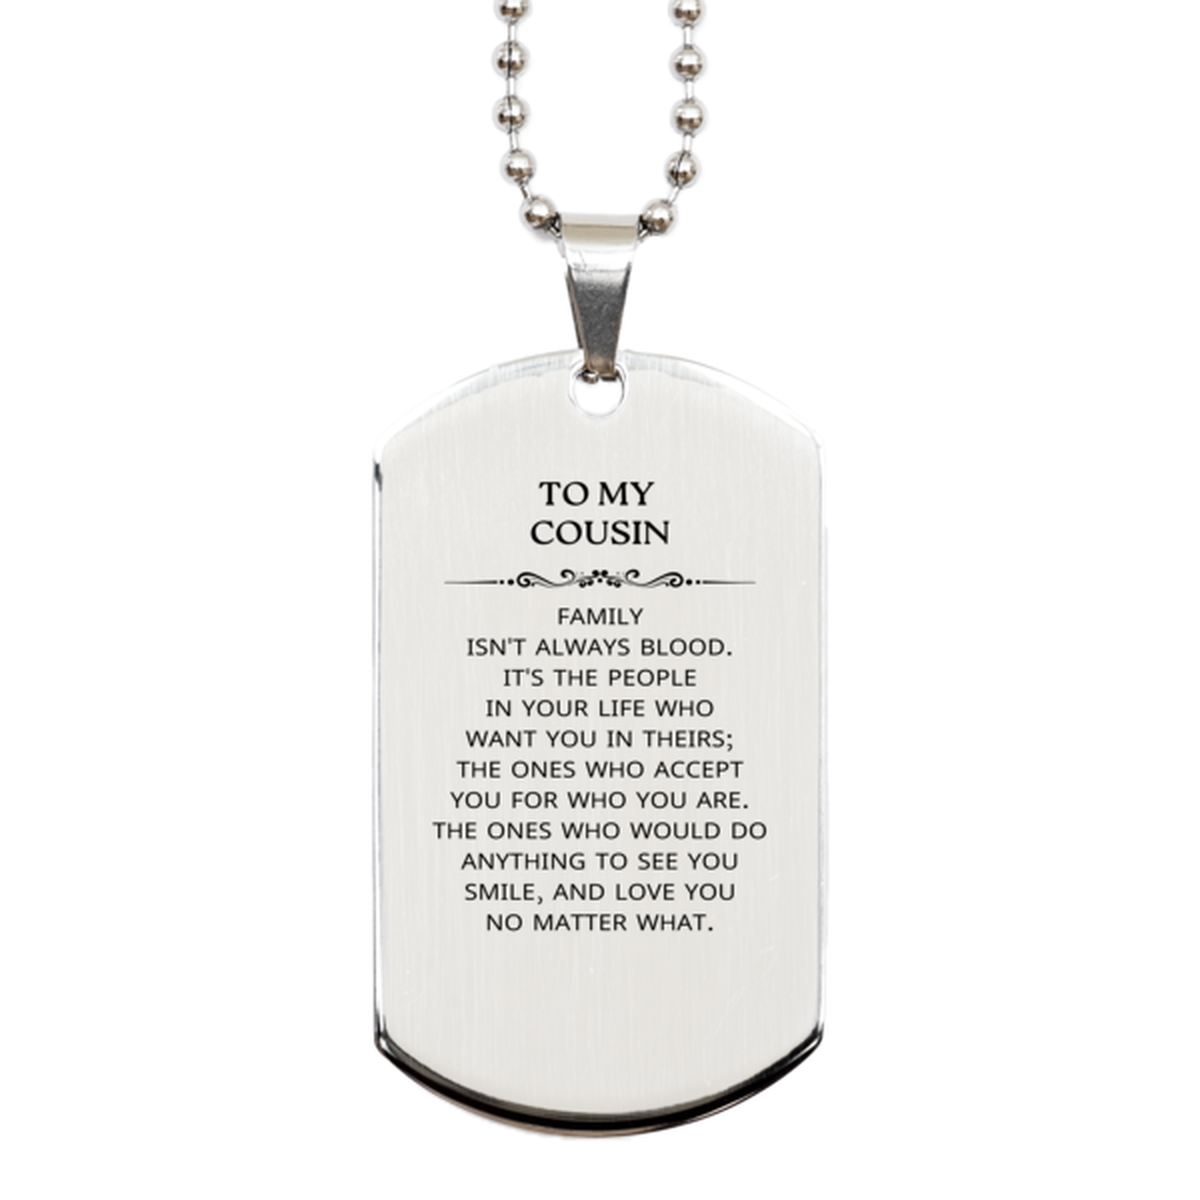 To My Cousin Gifts, Family isn't always blood, Cousin Silver Dog Tag, Birthday Christmas Unique Present For Cousin